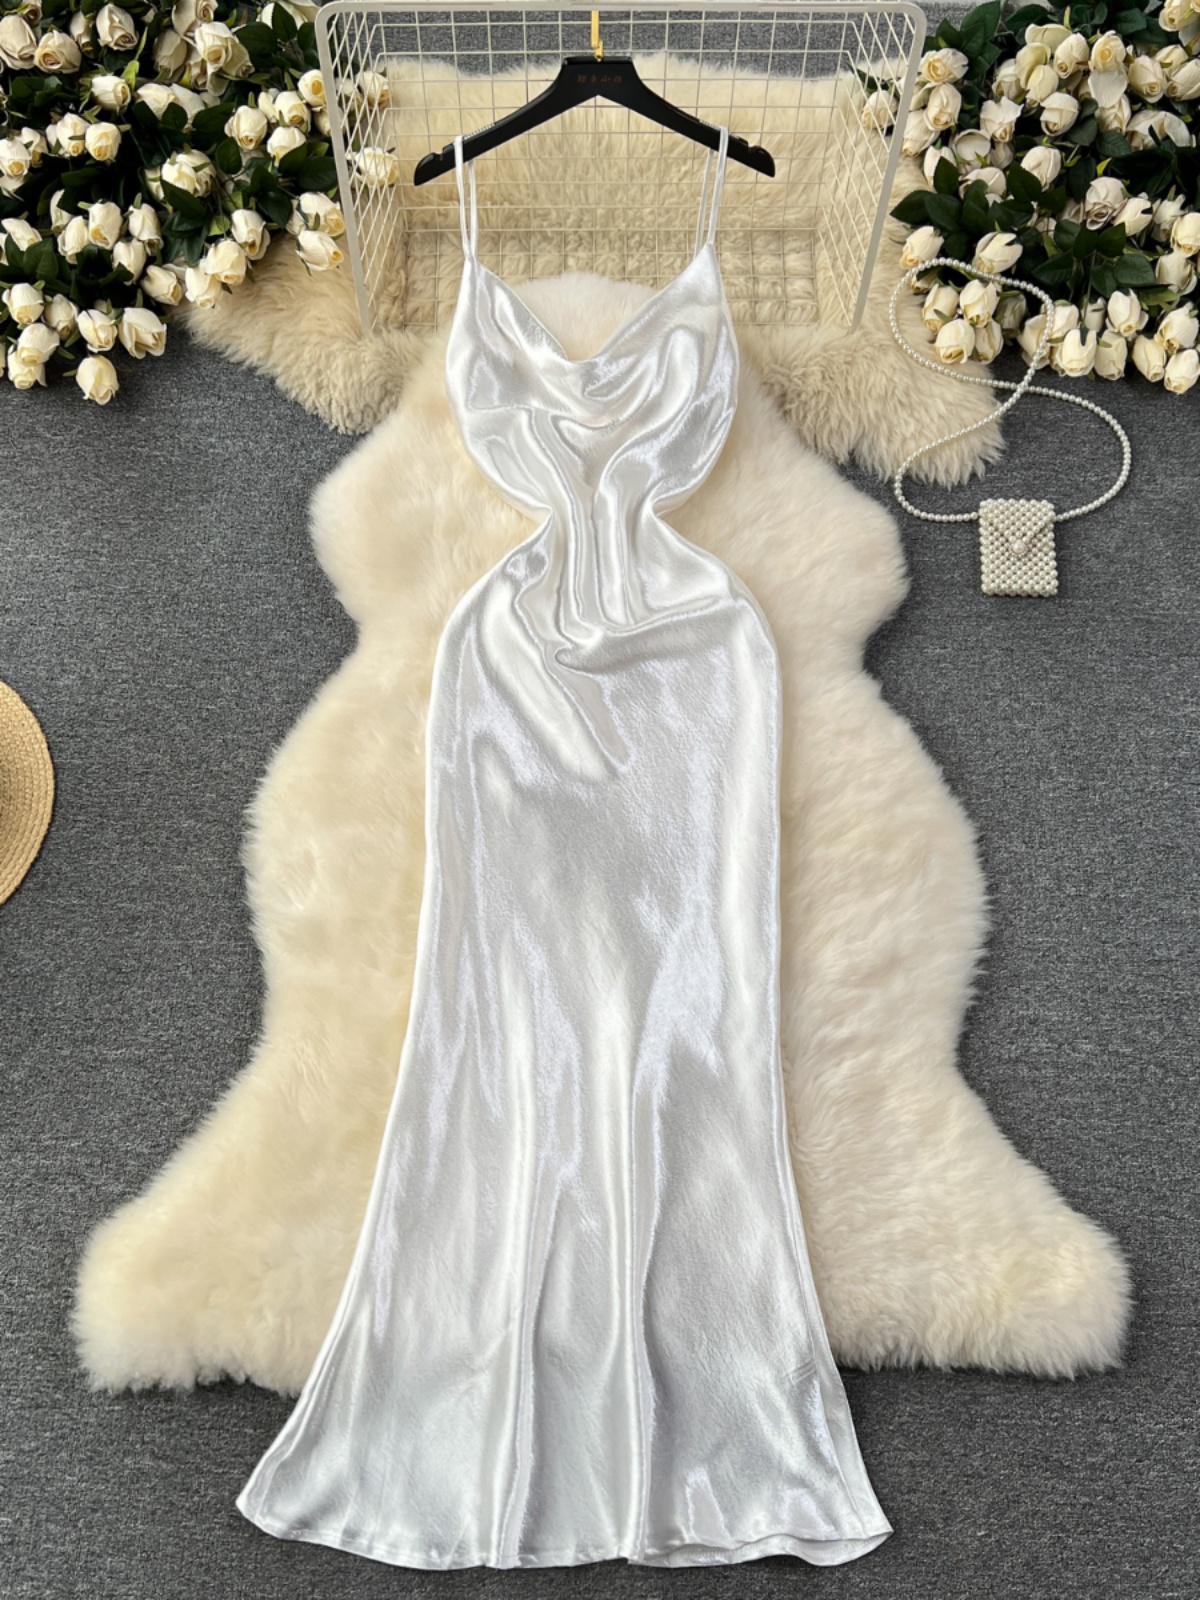 White mini dress for women's summer wear, new French style, noble and elegant, swinging collar, suspender, flowing satin dress